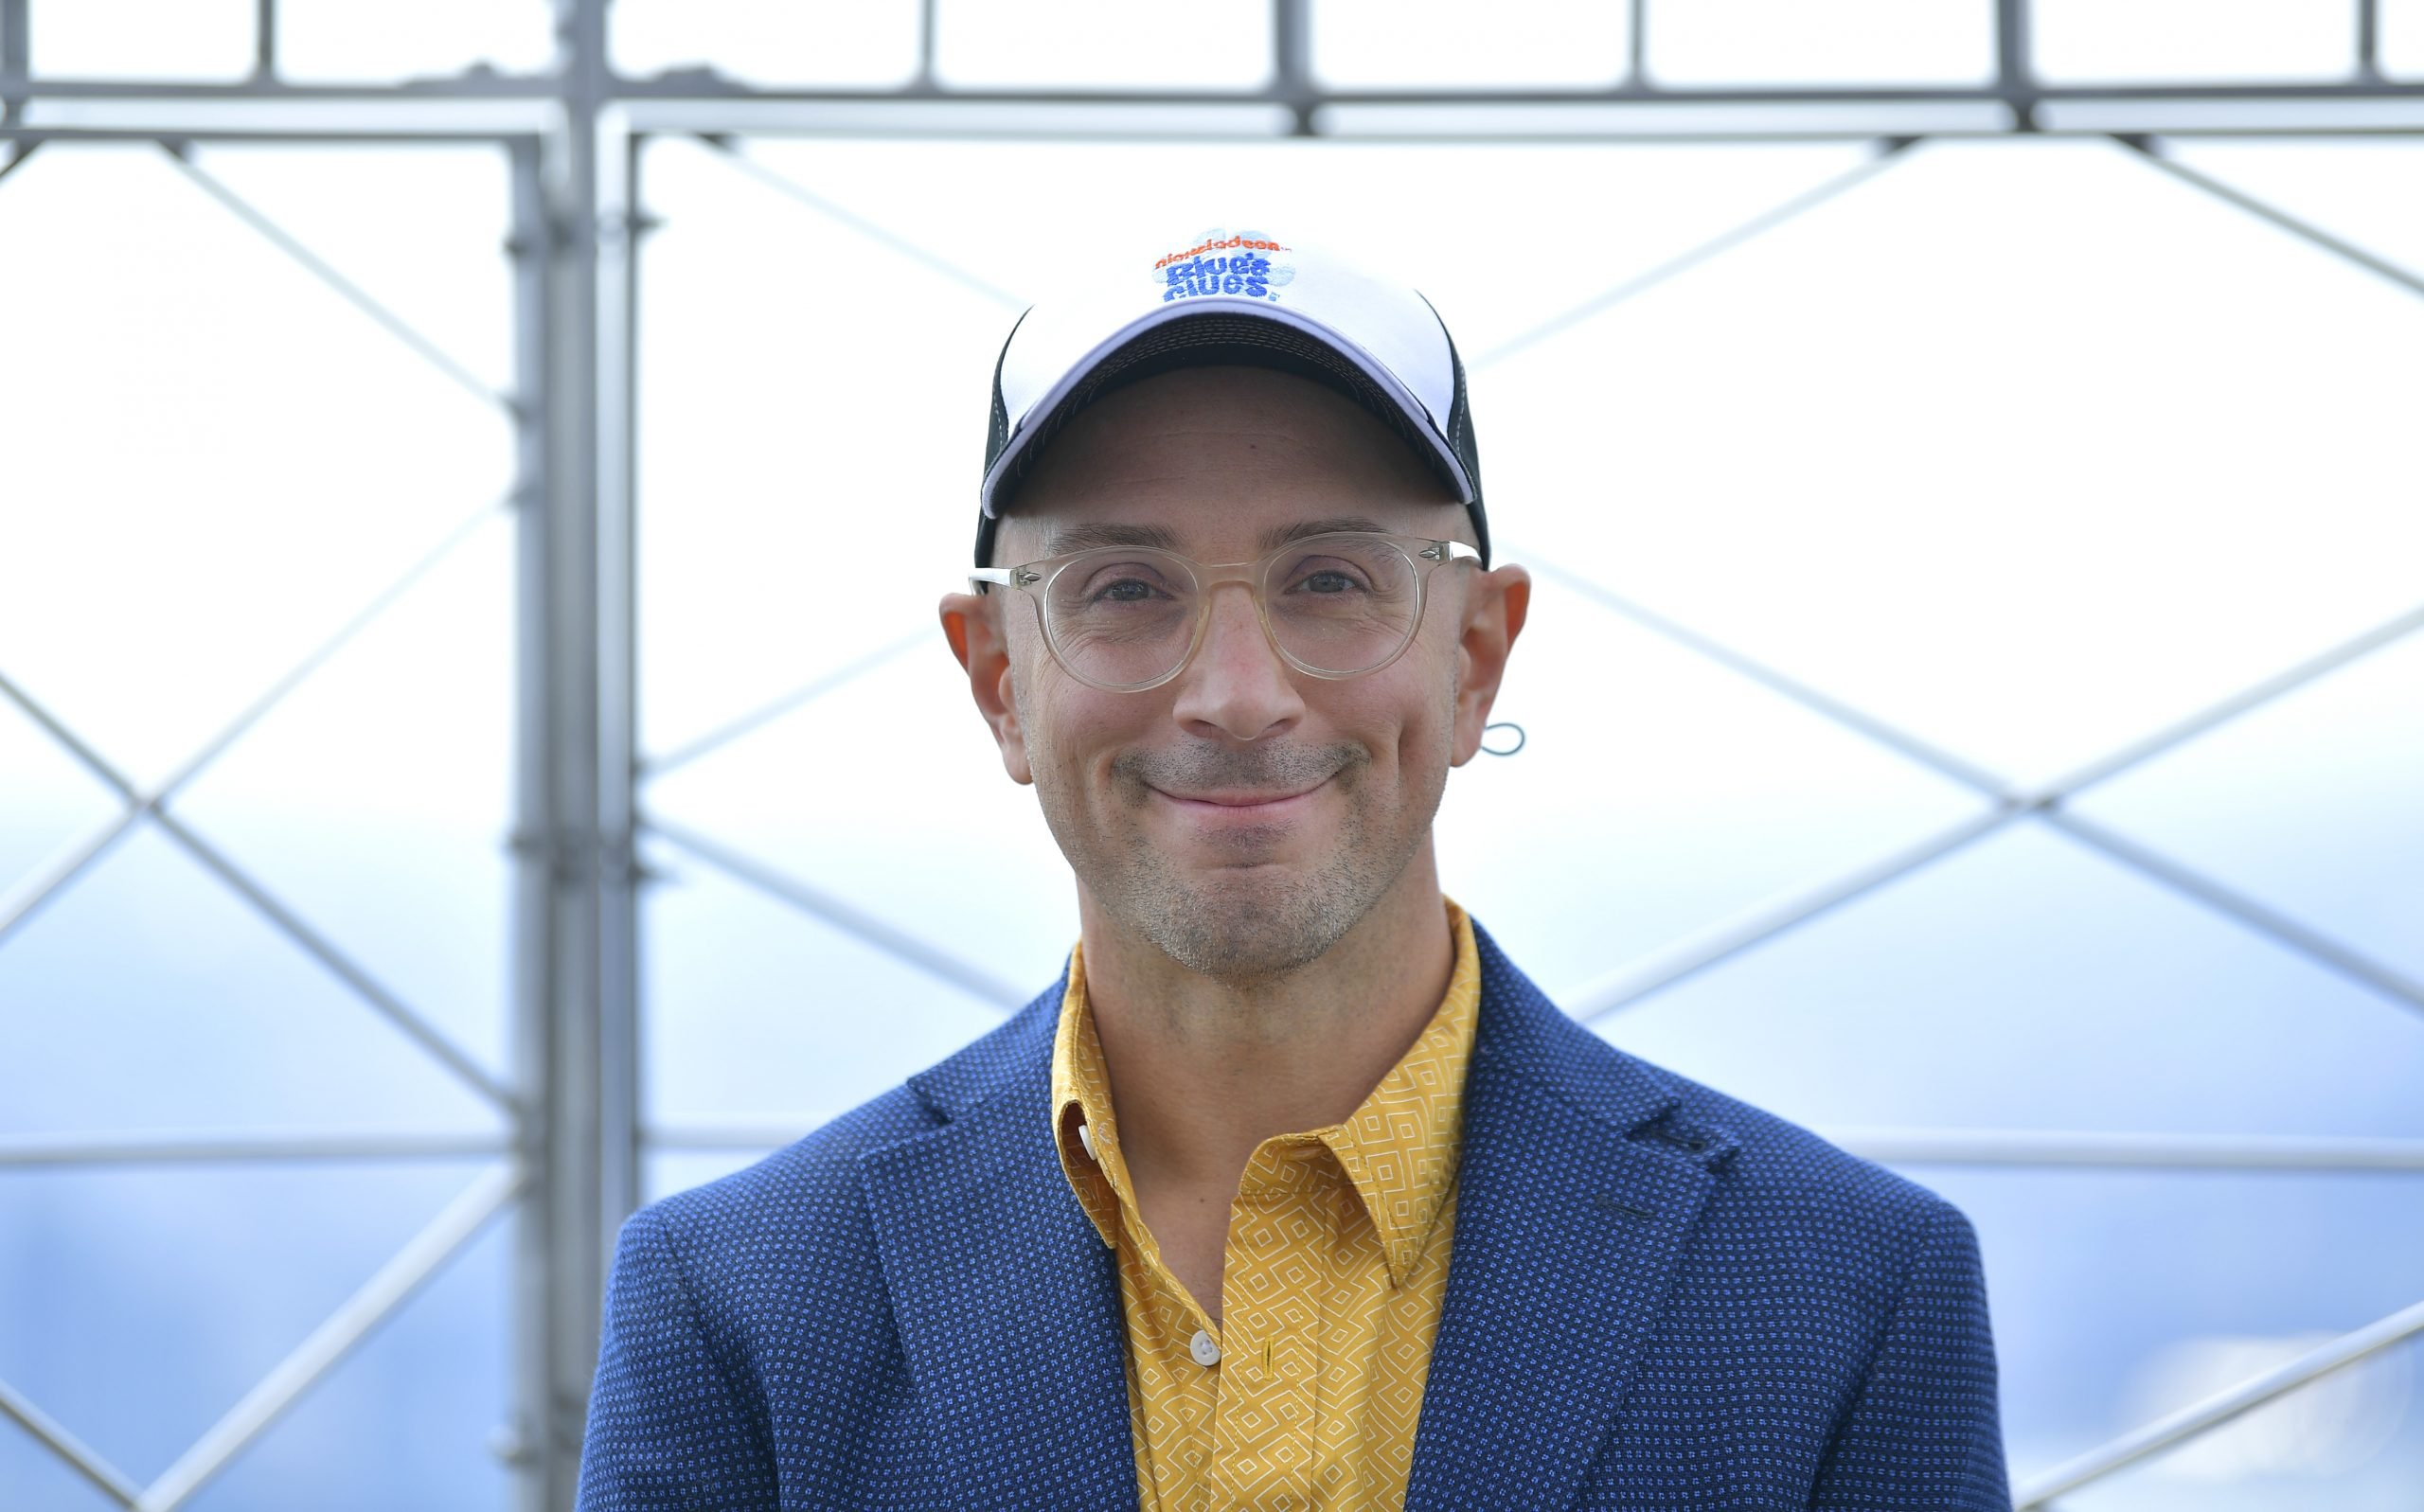 Steve Burns poses for a photo in the observatory as he and Josh Dela Cruz light the Empire State Building blue in celebration of 'Blue's Clues' 25th Anniversary